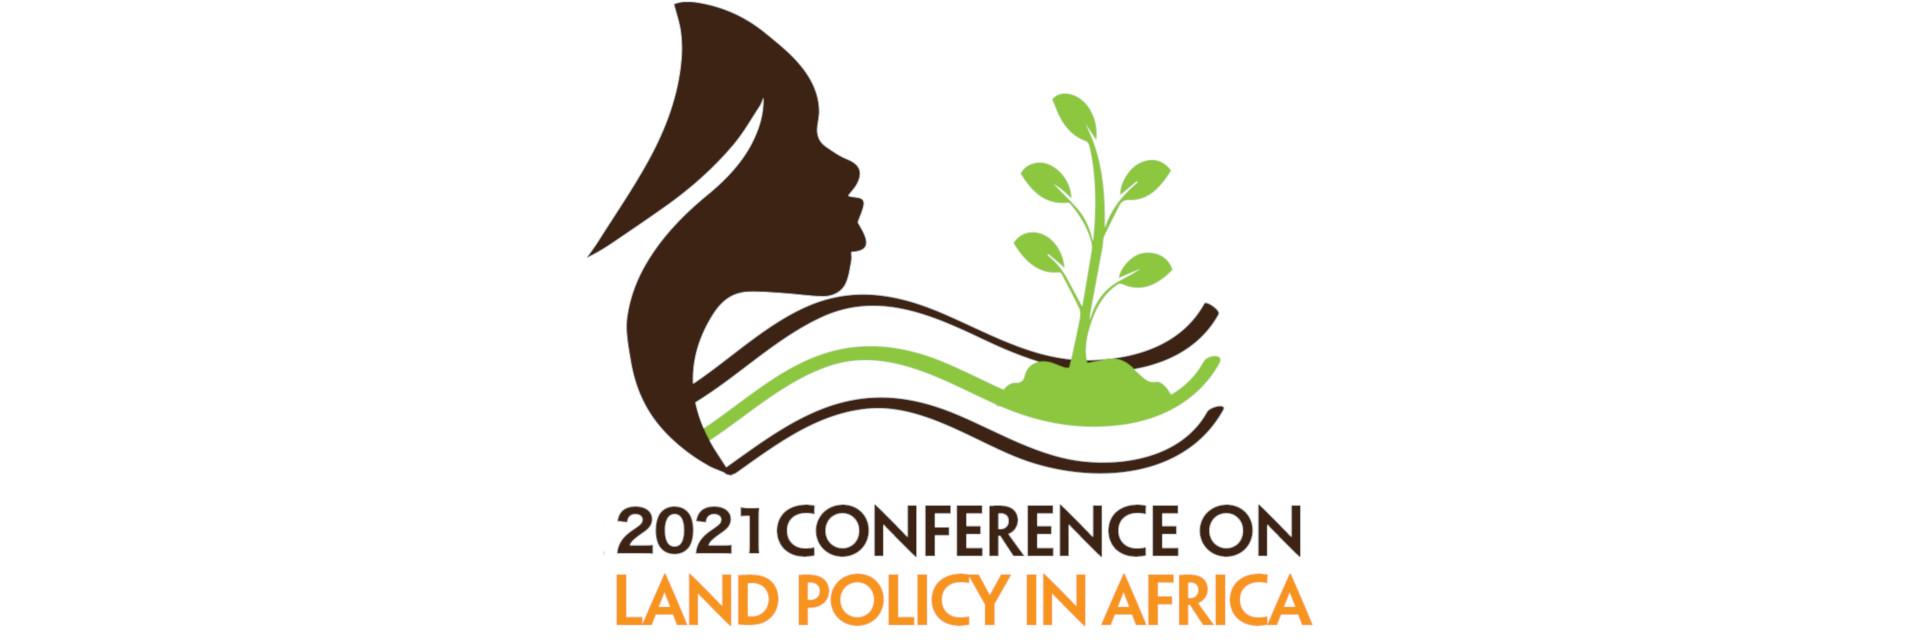 2021 Conference on Land Policy in Africa (CLPA-2021)